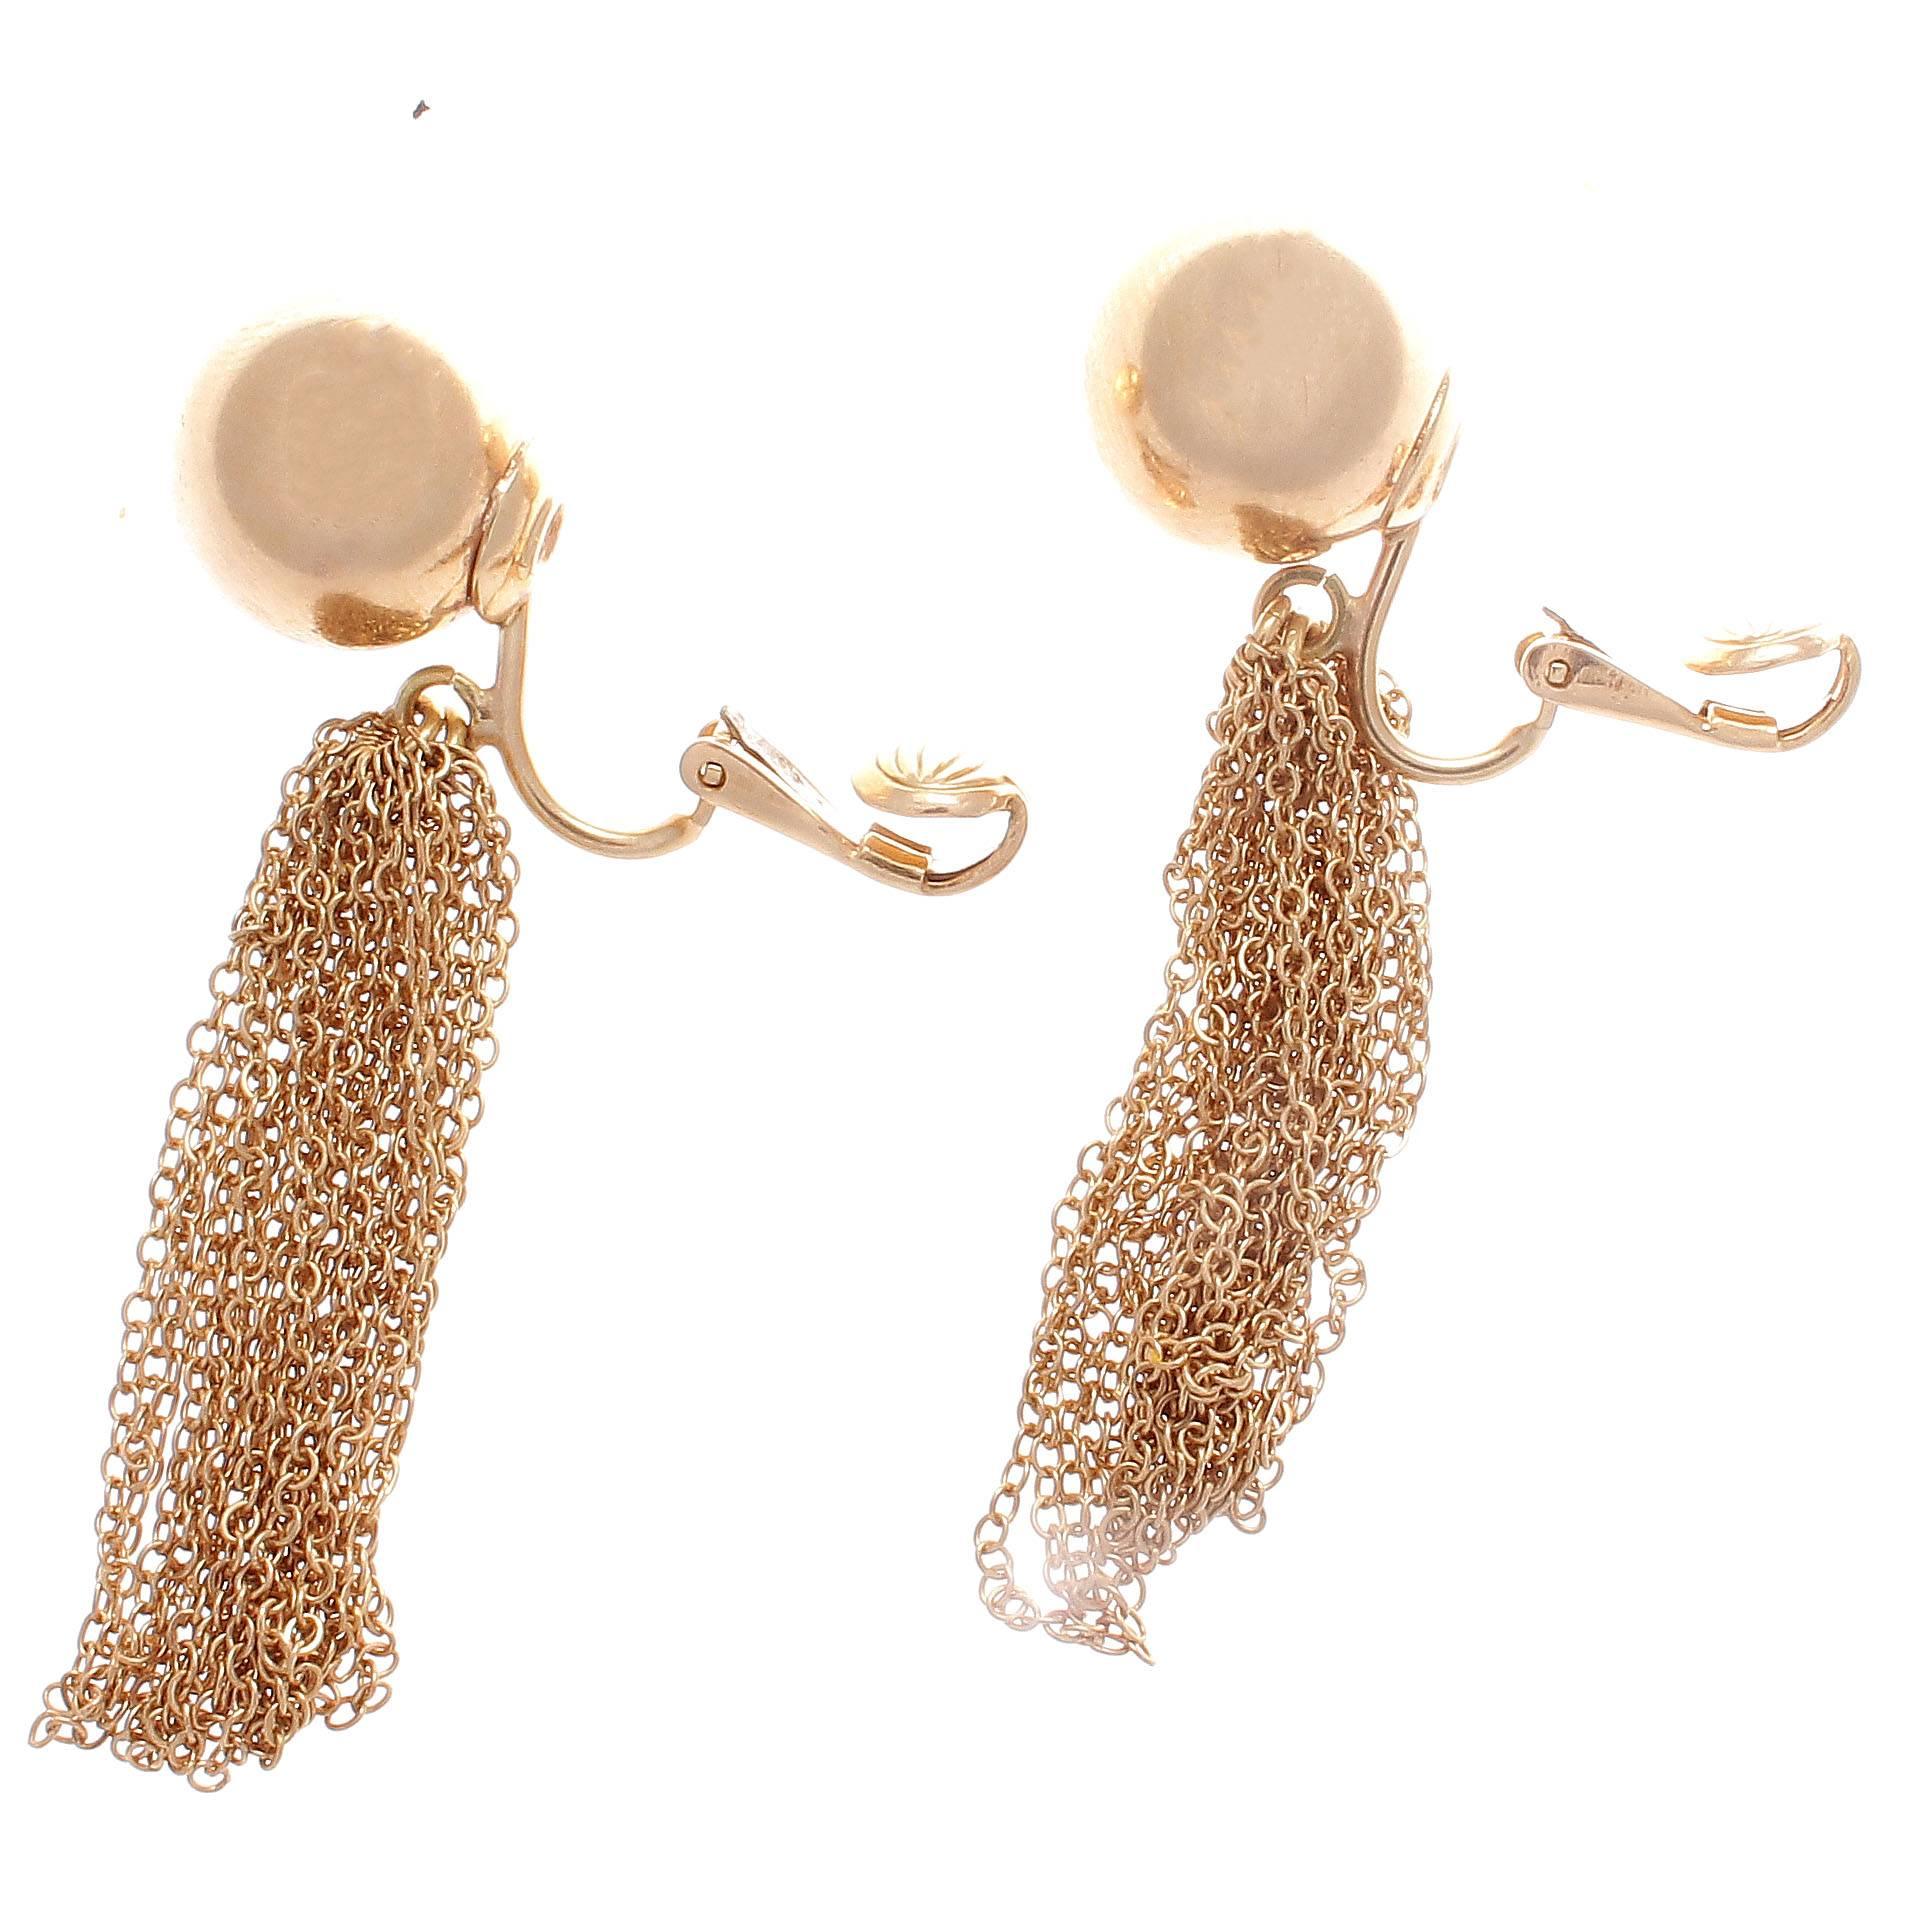 A creative interpretation of the traditional chandelier earring. Long, elegant and freely moving with every step you take. The intricate gold mesh is held by two spheres of glistening 14k gold. 